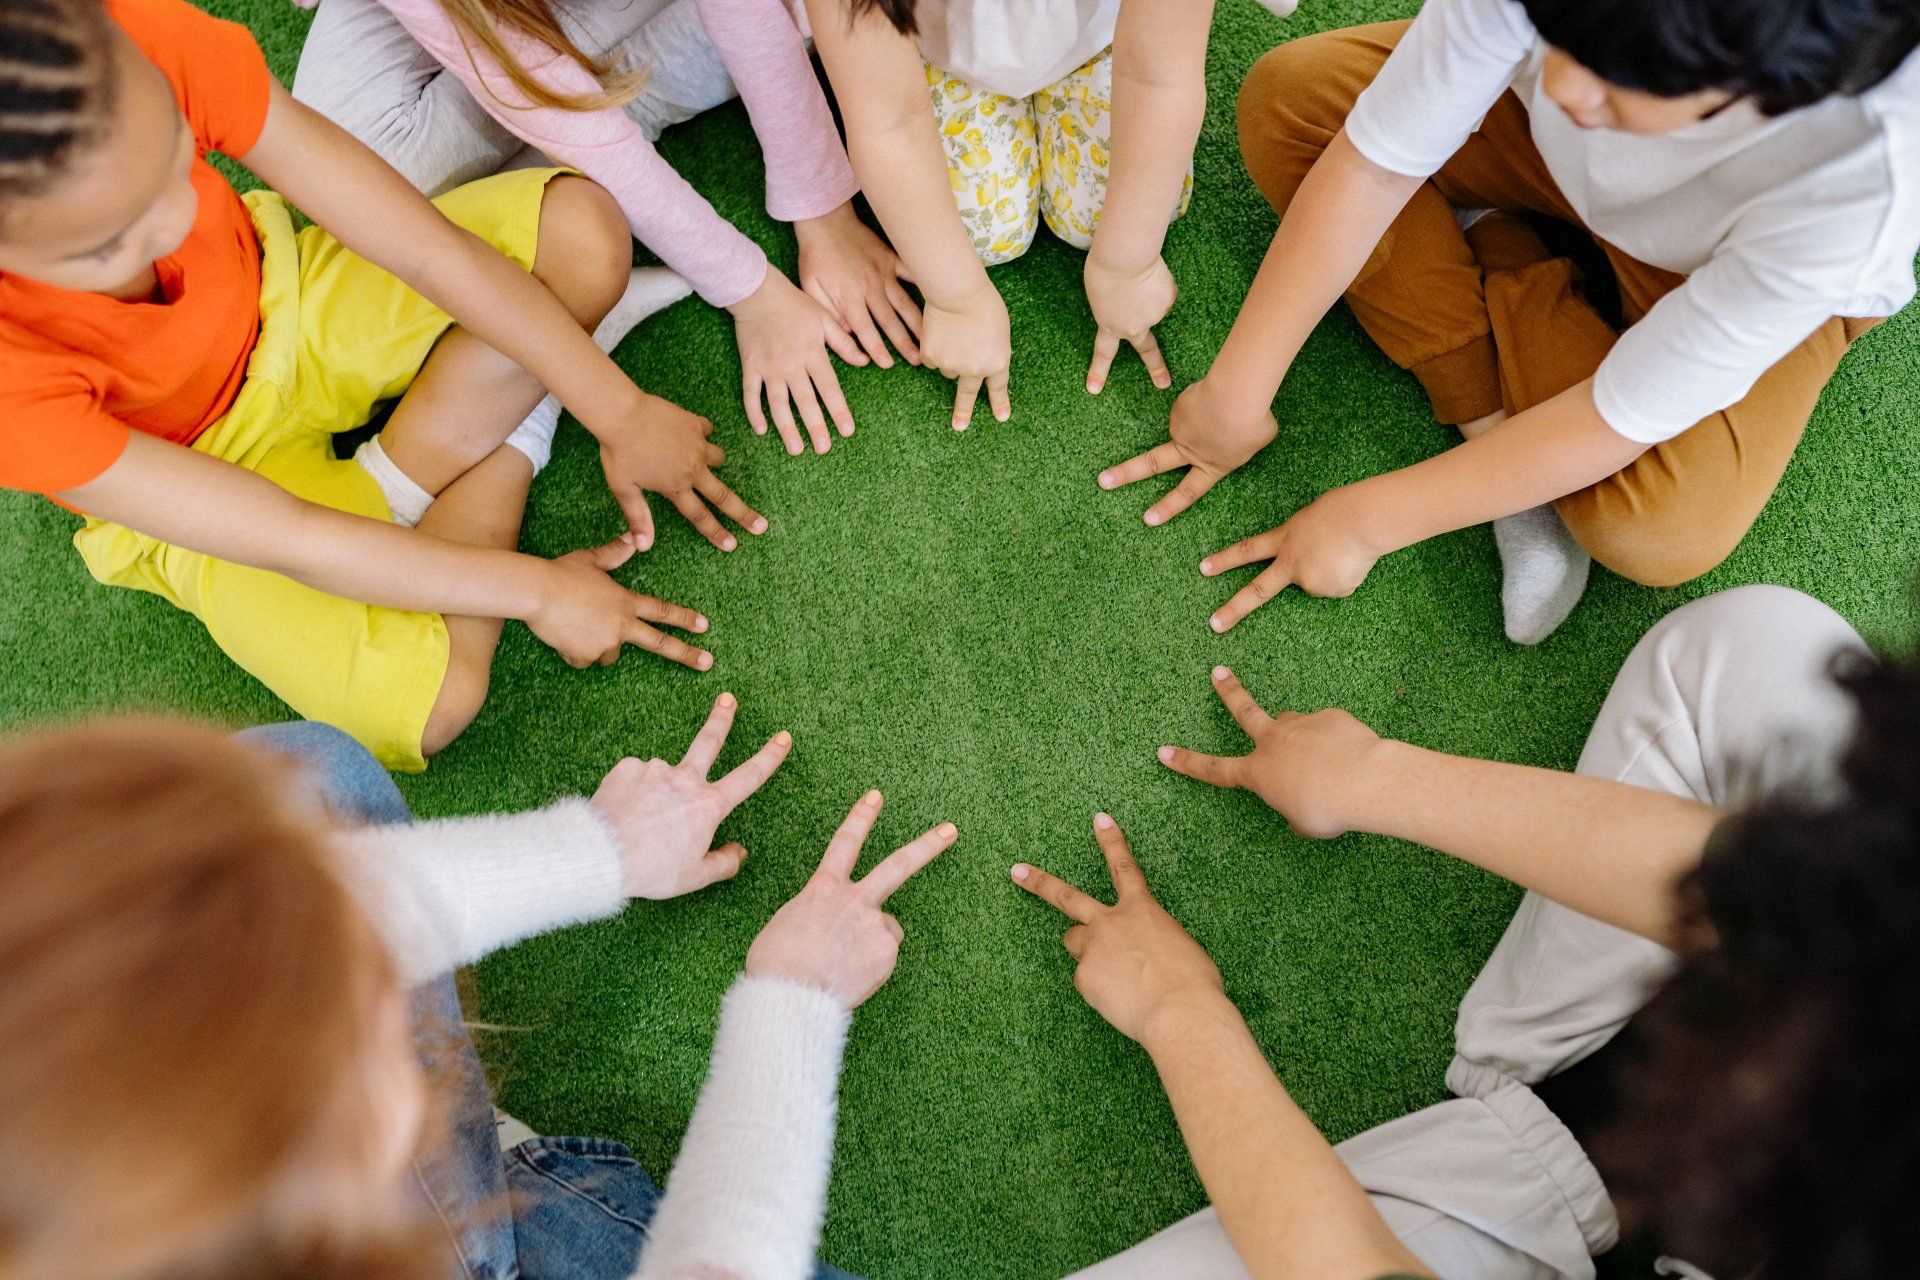 Children formed a circle while sitting with their hands placed on the ground showing a peace sign.